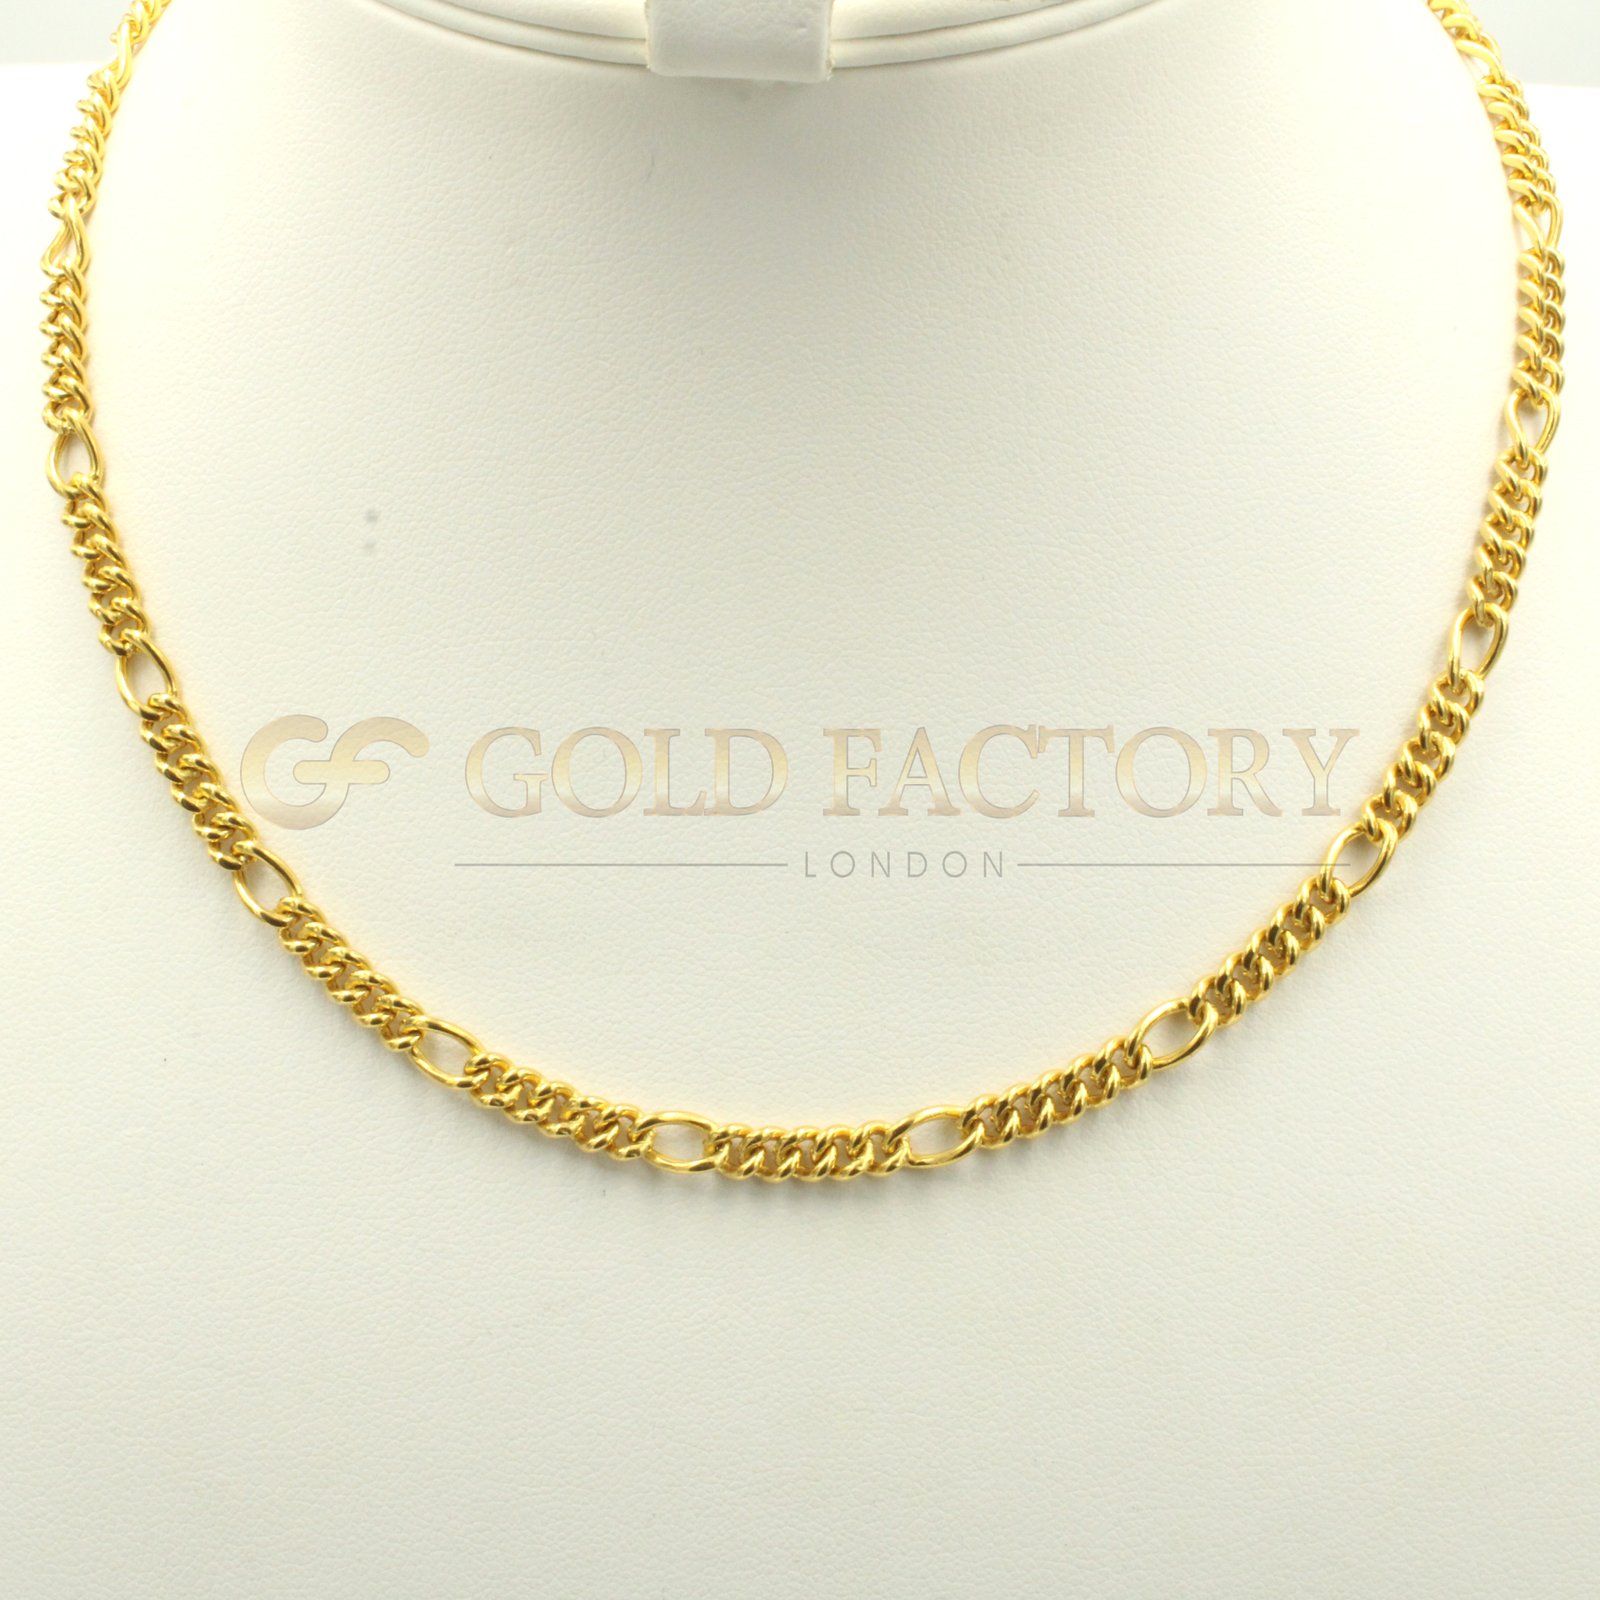 Lovely 22ct Gold Chain